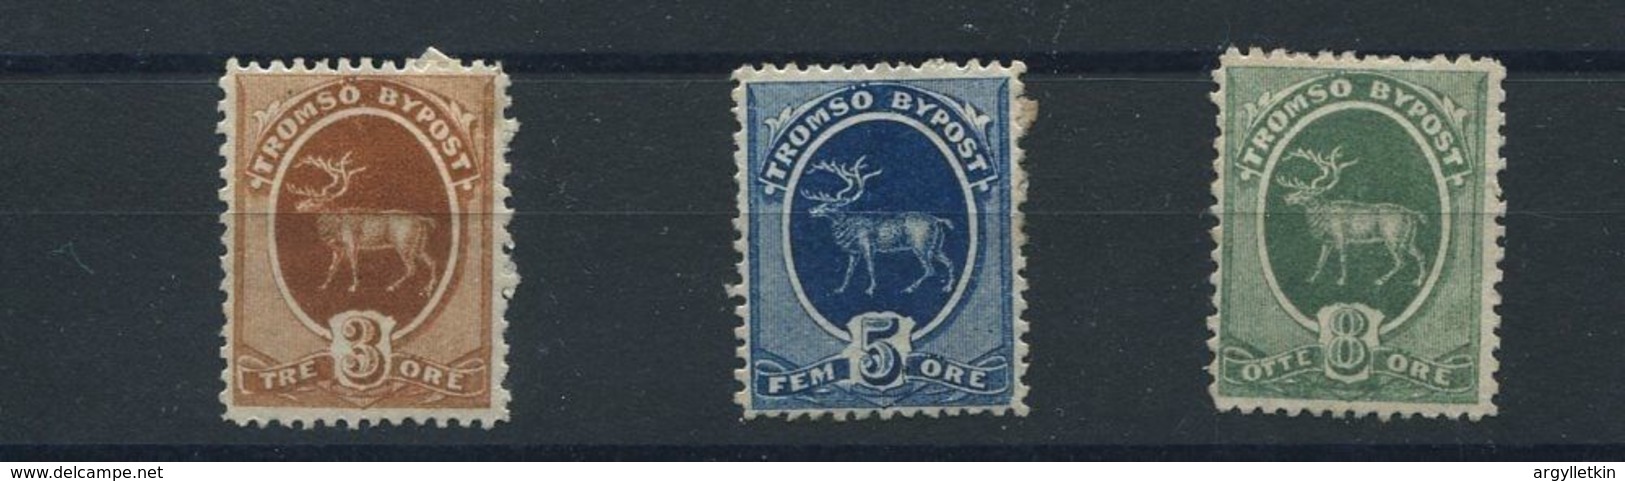 NORWAY LOCAL POST TROMSO REINDEER 1881 - Local Post Stamps